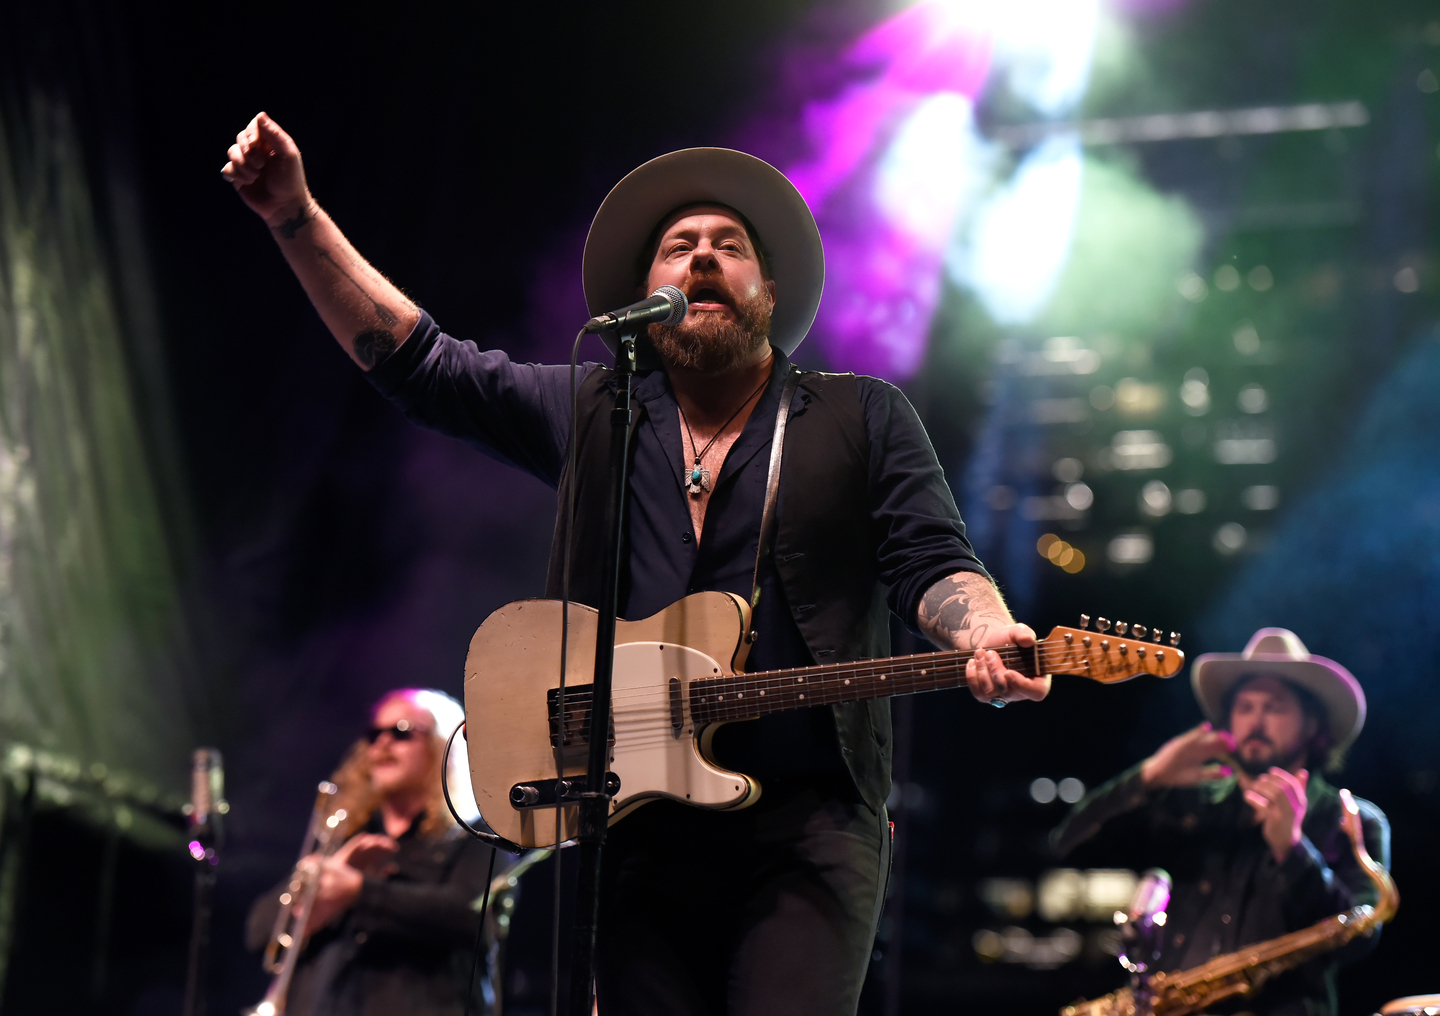 Nathaniel Rateliff & The Night Sweats closed out Friday night on The SXSW Outdoor Stage presented by MGM Resorts. Photo by Ismael Quintanilla/Getty Images for SXSW